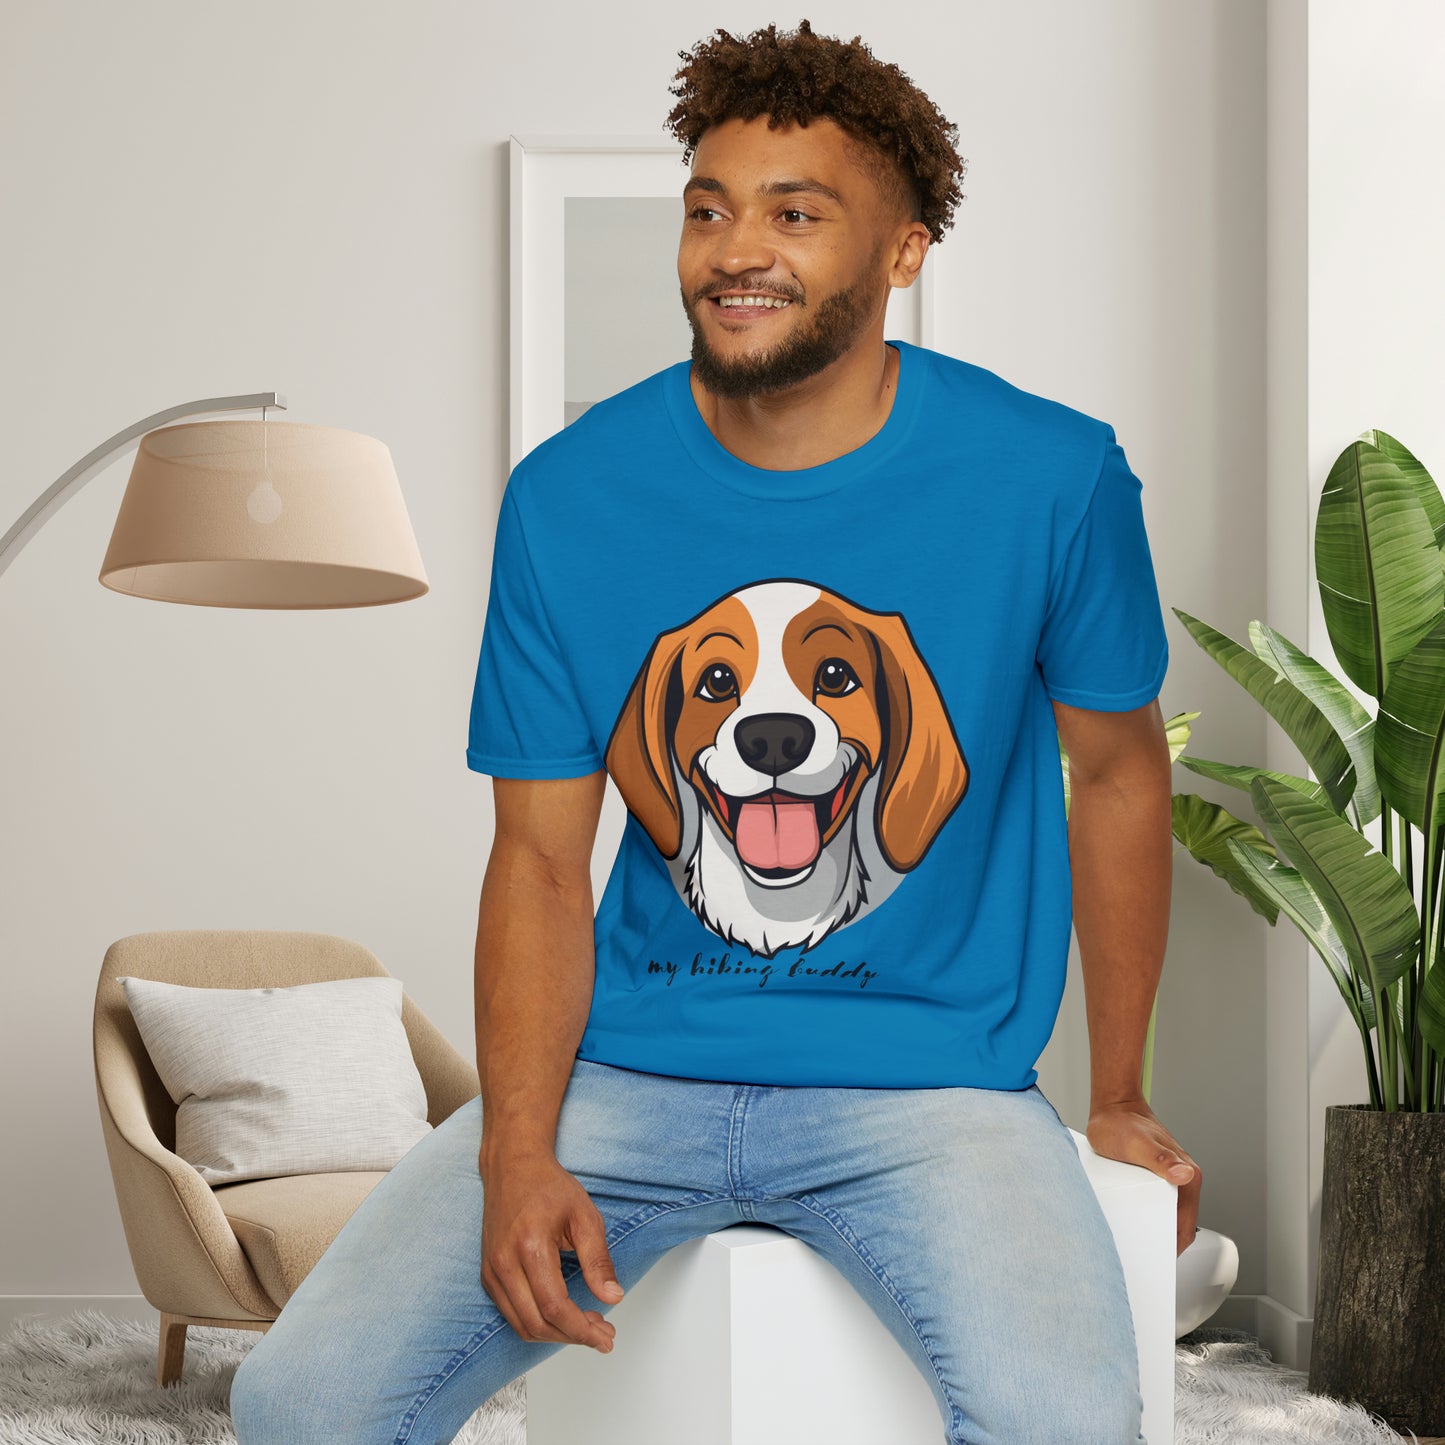 A great shirt for the dog lover who just can’t imagine a hike without their furry friend. This is a Unisex Softstyle T-Shirt.